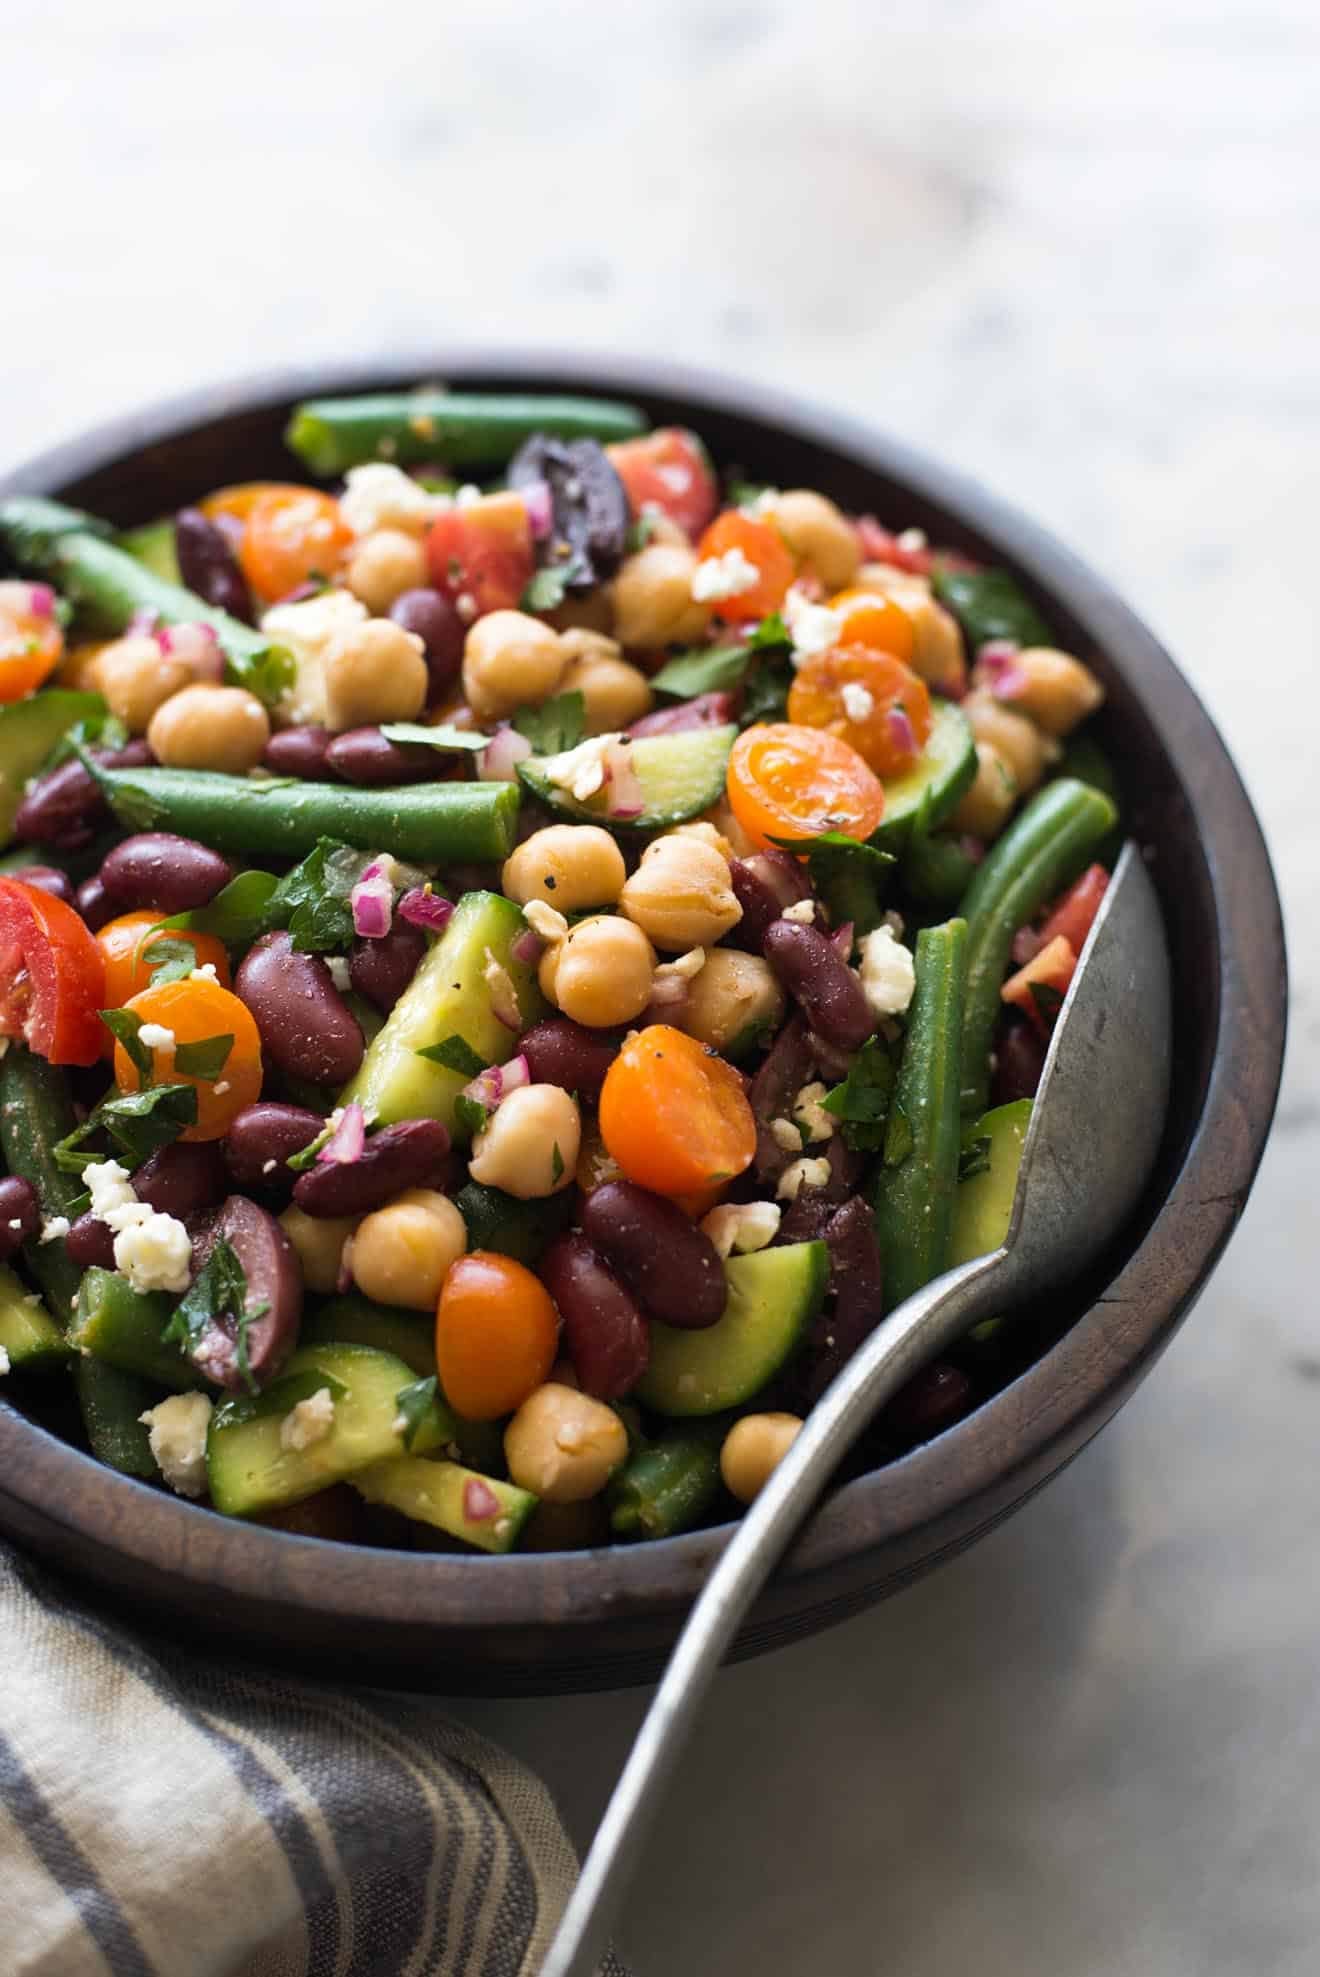 Mediterranean Three Bean Salad Recipe - this delicious, healthy salad is great as a side or a main meal!